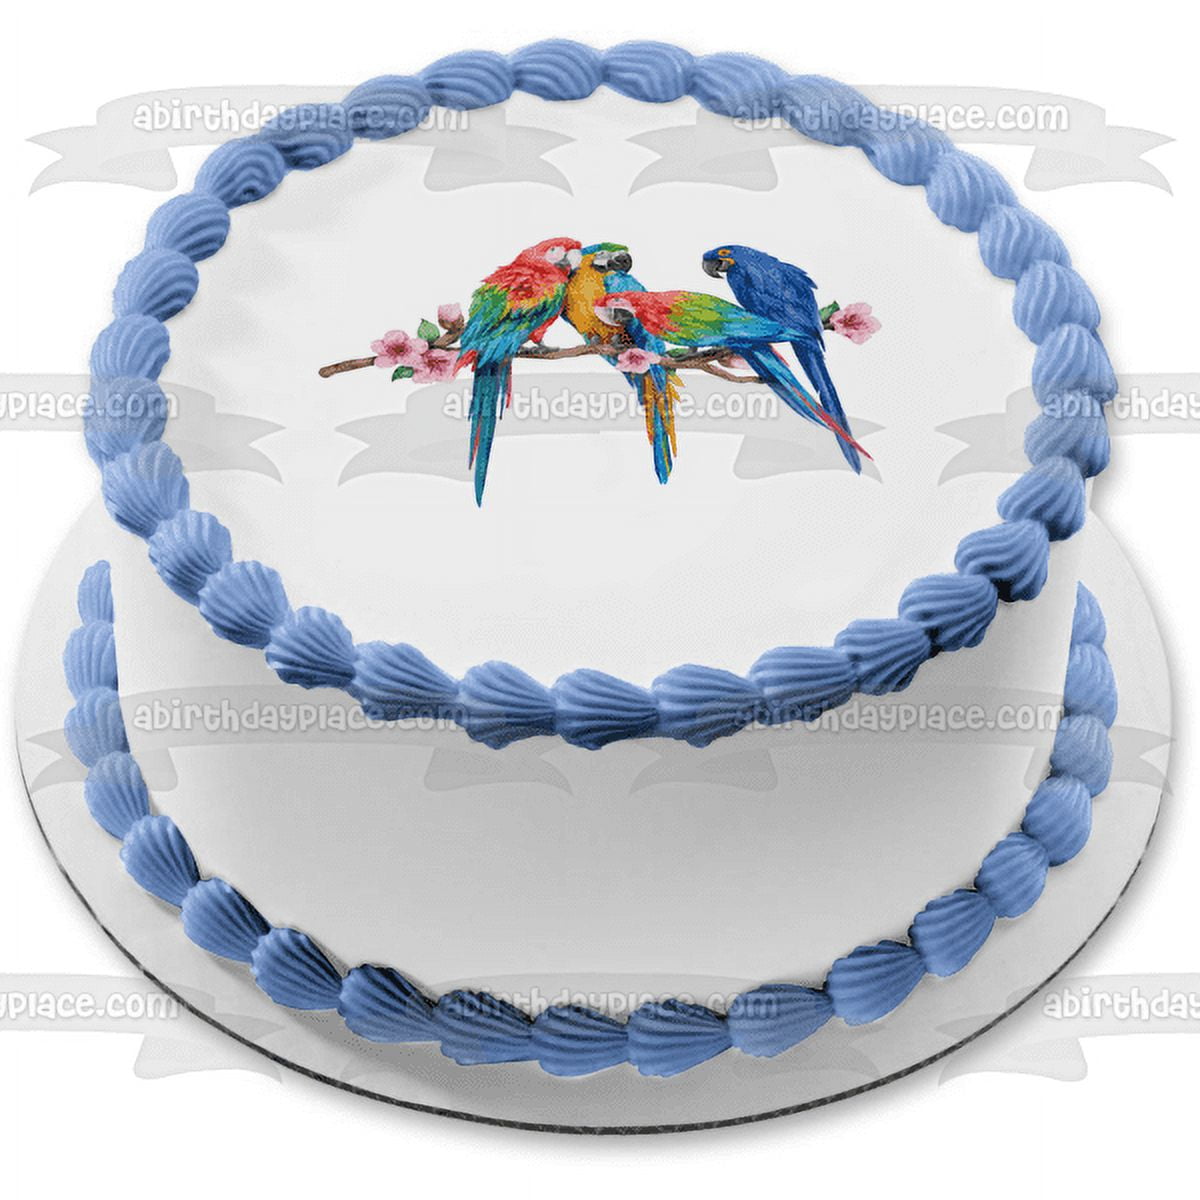 Buy Parrot Bird Edible Handmade Birthday Cake Decoration, Edible Parrot Cake  Topper approx 16cm Tall Online in India - Etsy